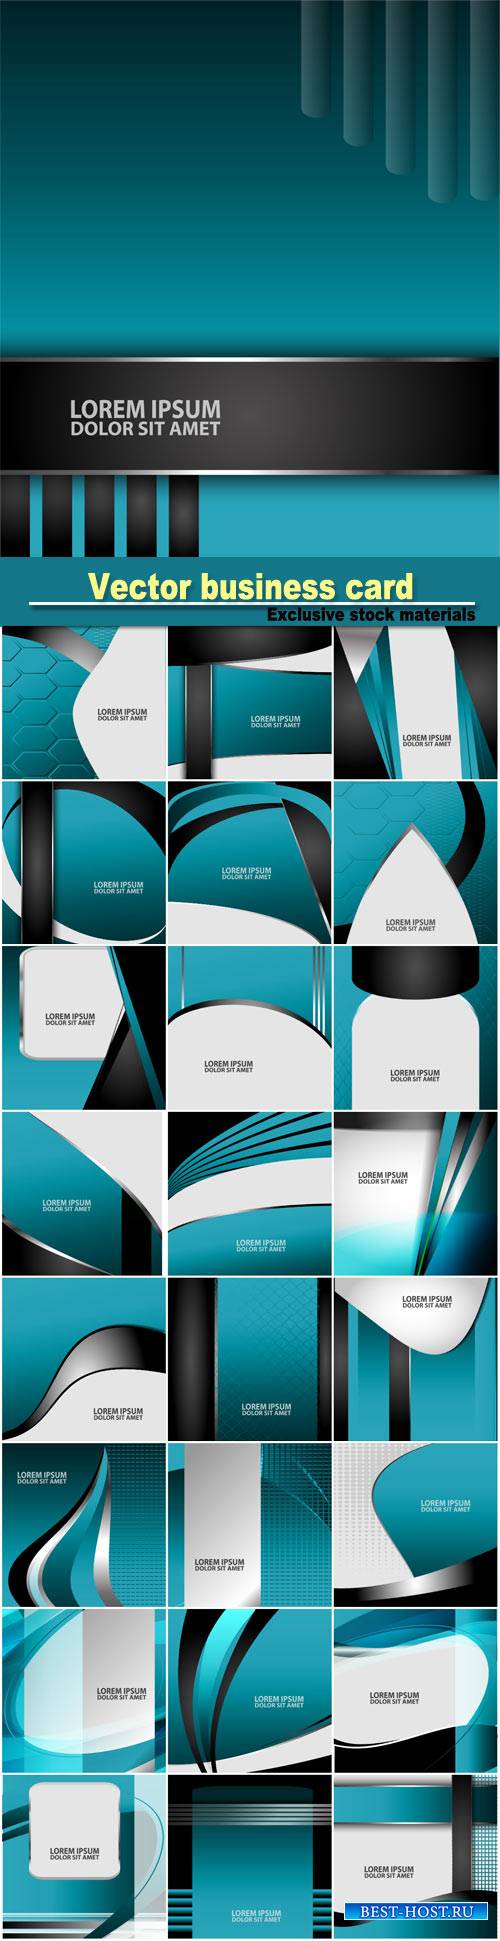 Vector business card in abstract style